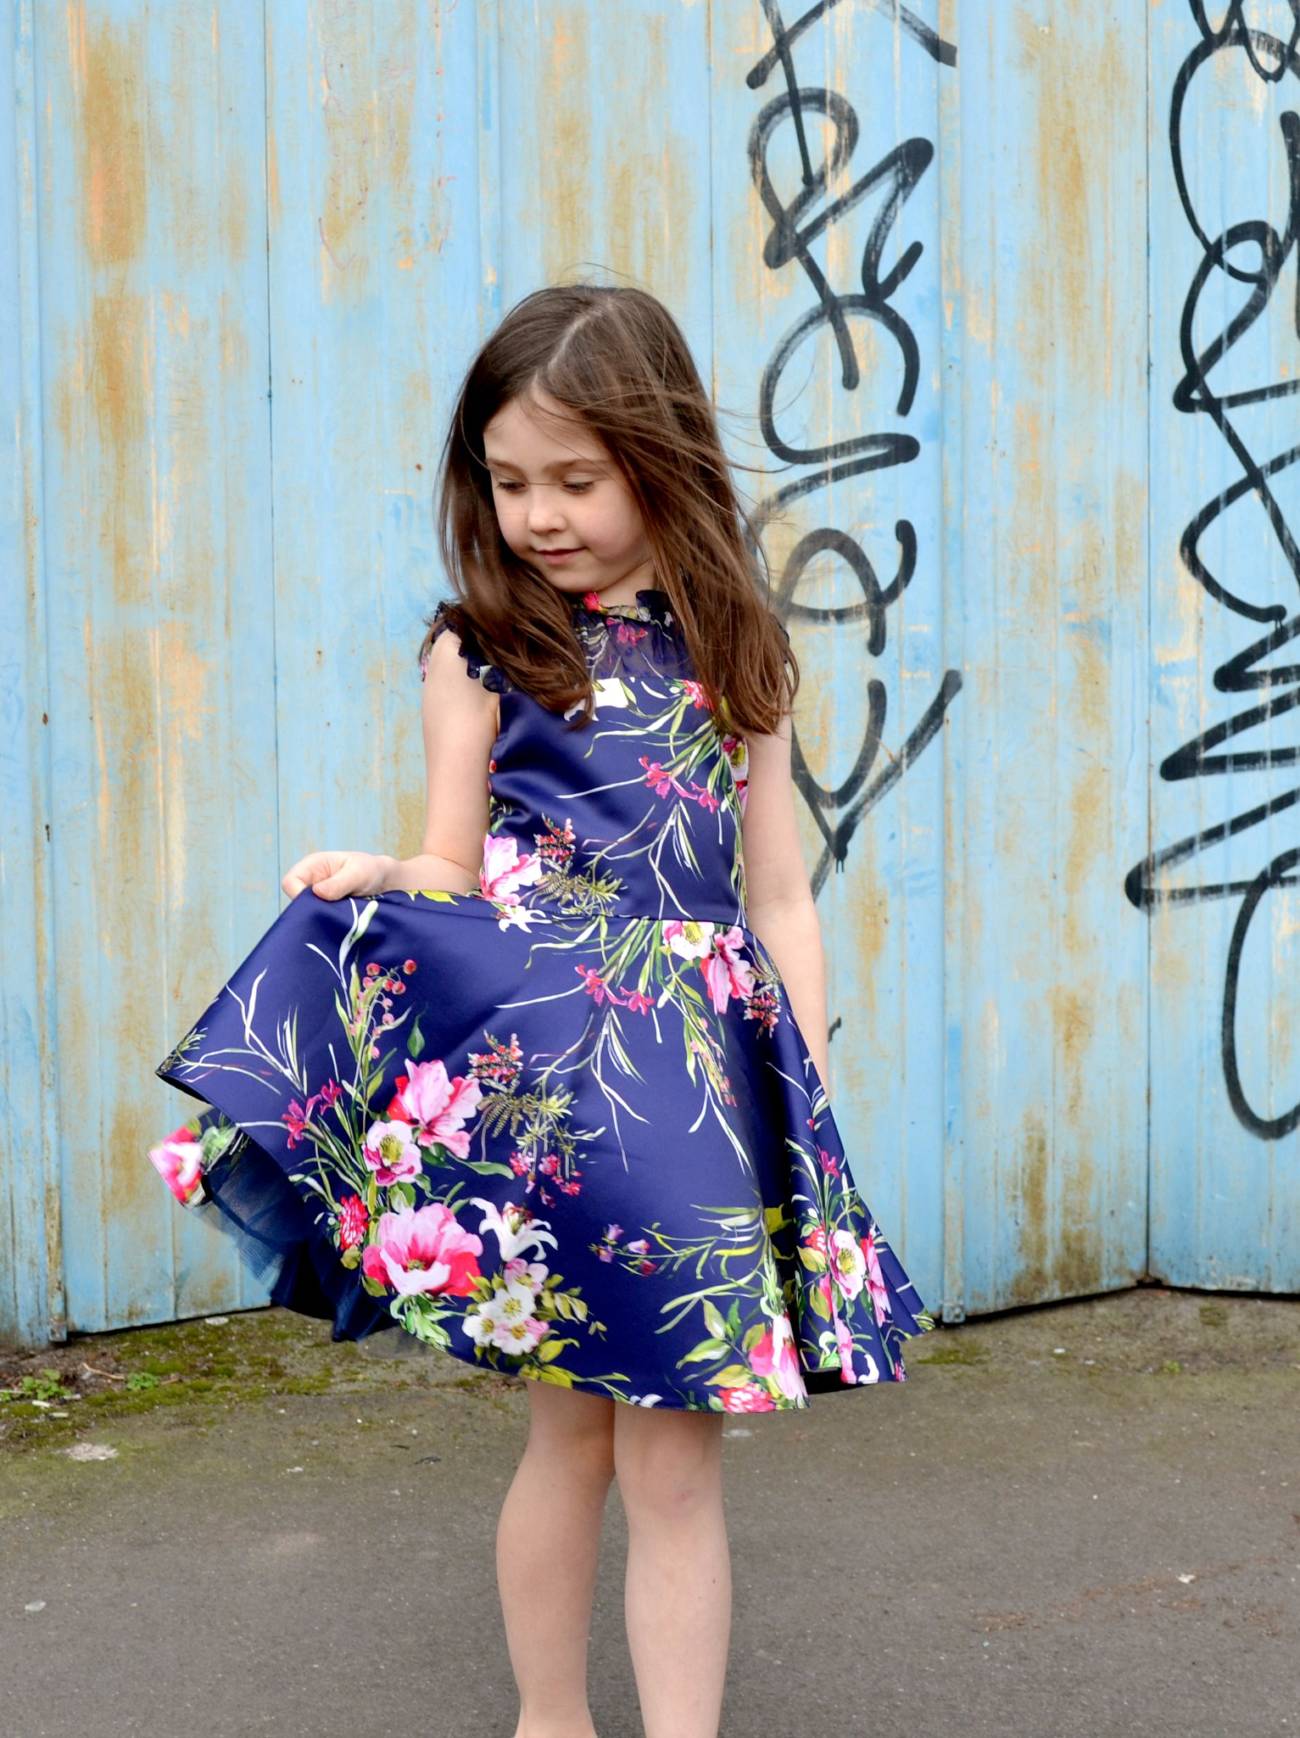 Spinning into Spring, With David Charles Luxury Girls Dresses